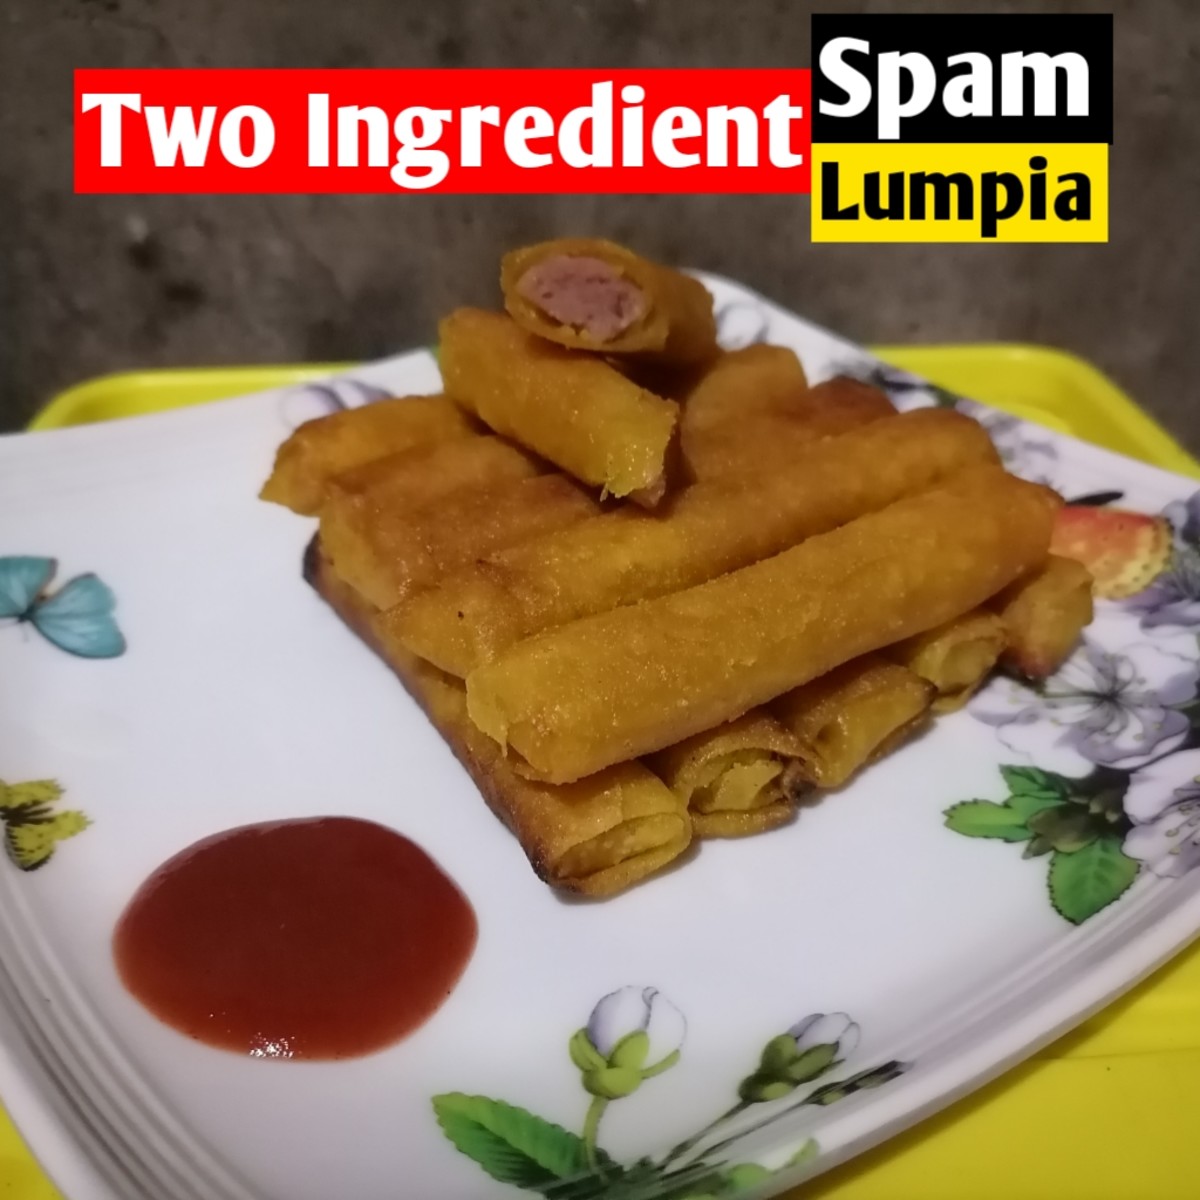 Two-Ingredient Spam Lumpia